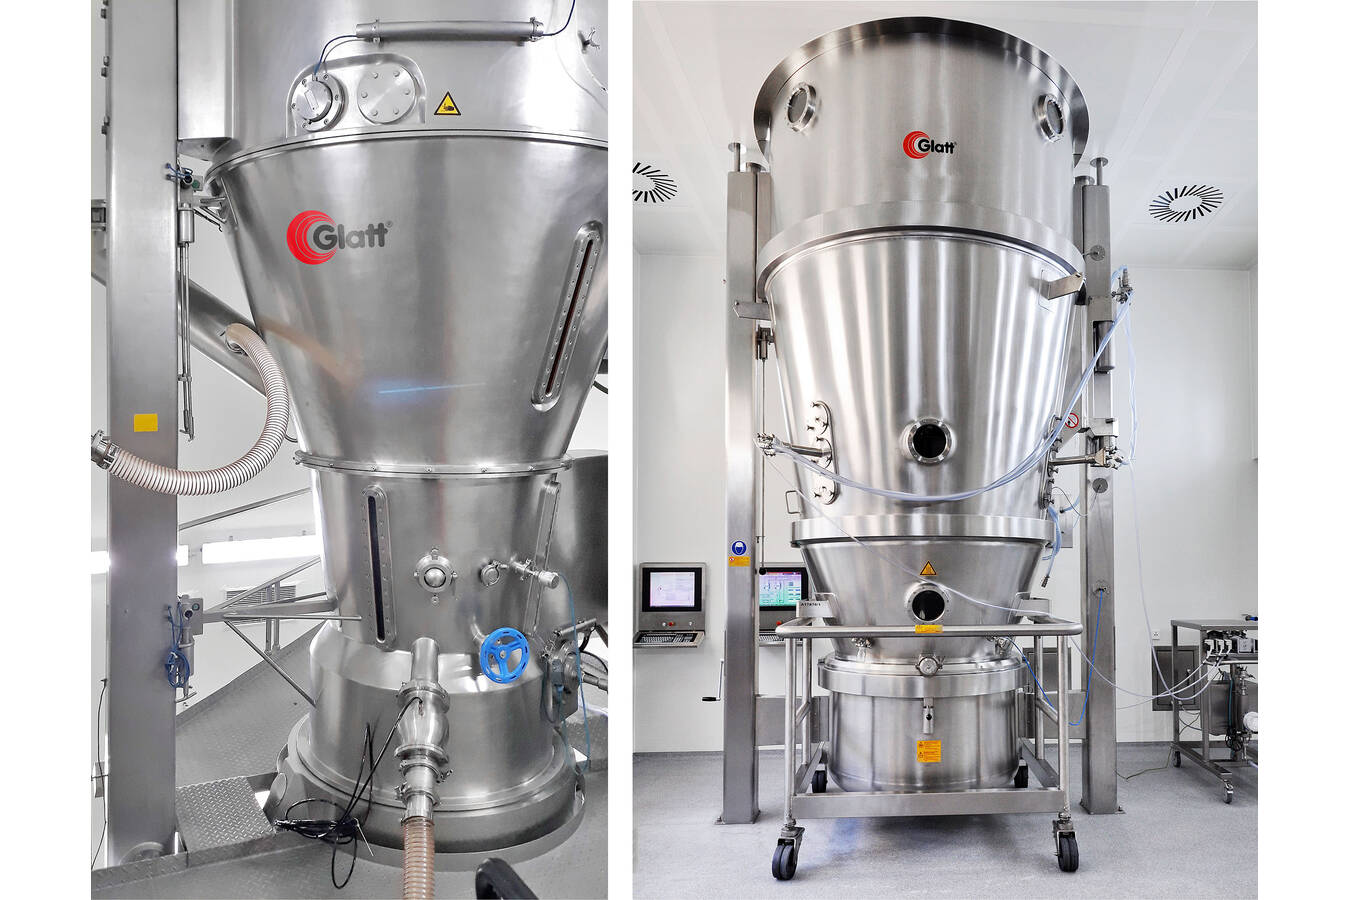 Left: Fluid bed granulator with continuous product discharge; right: Batch fluid bed granulator and coater. Both systems at the Glatt Technology Center in Weimar process solvent-based products